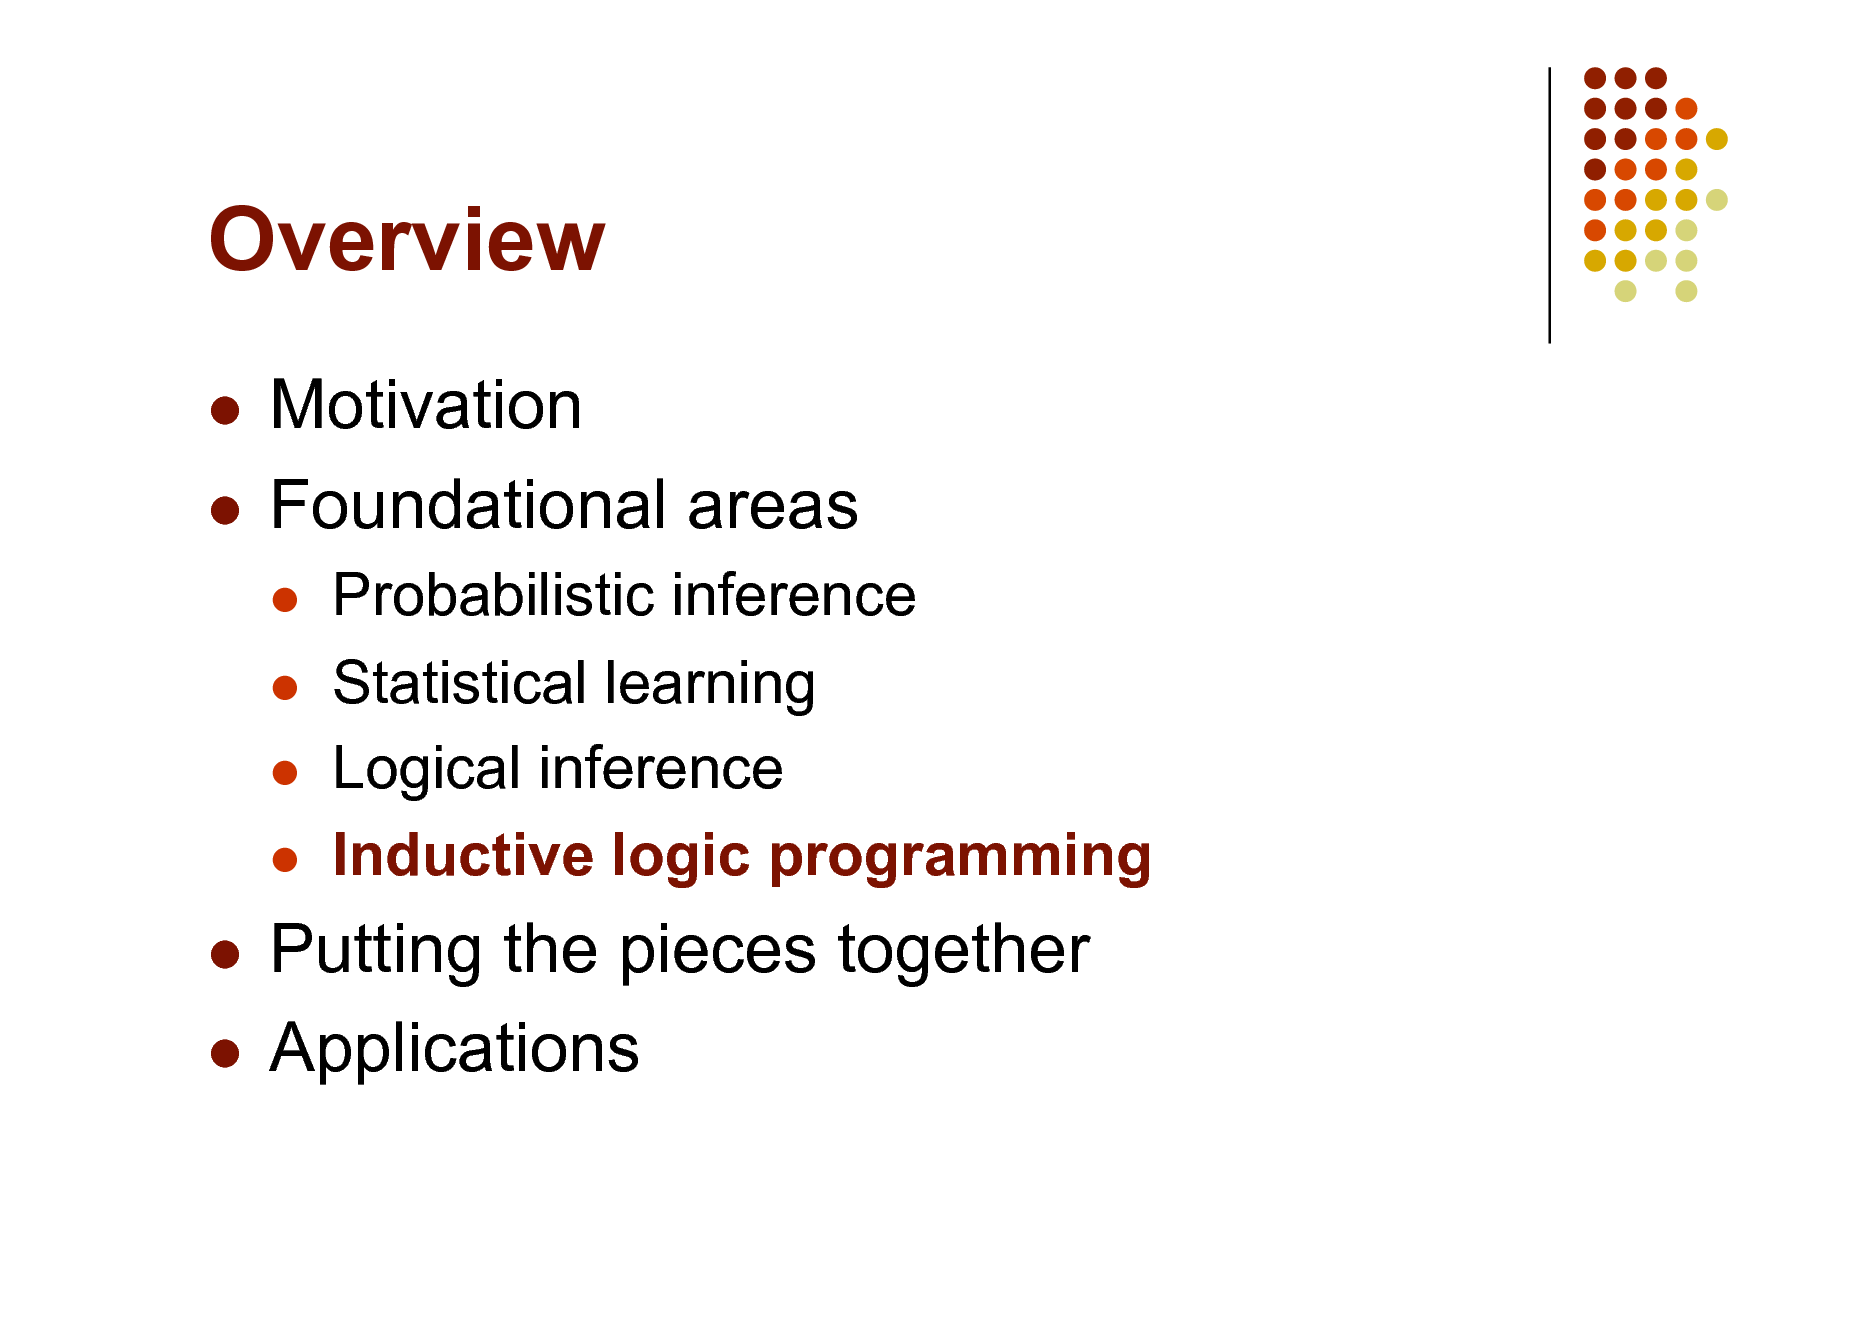 Slide: Overview
Motivation  Foundational areas

   

Probabilistic inference Statistical learning Logical inference Inductive logic programming

Putting the pieces together  Applications


